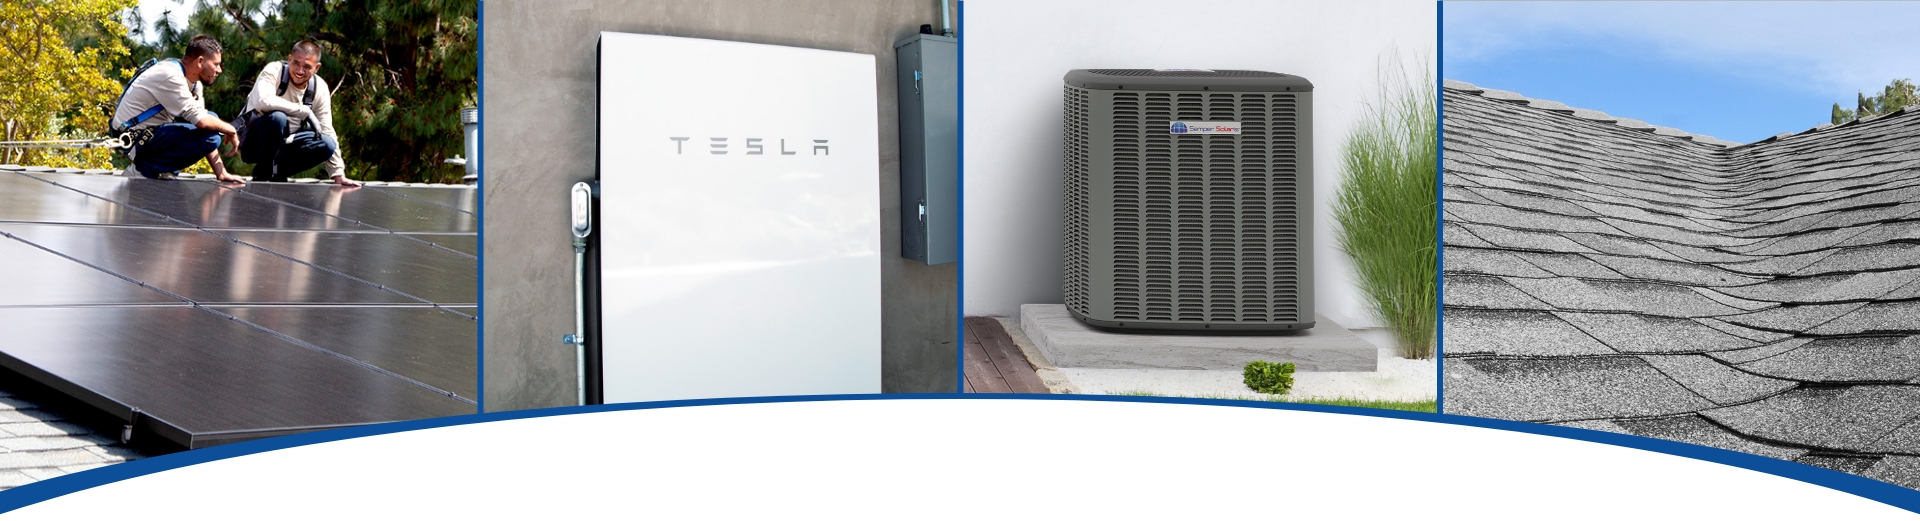 Solar Panel installation, Tesla Powerwall Battery Storage, Heating and Air Conditioning, Roofing Services